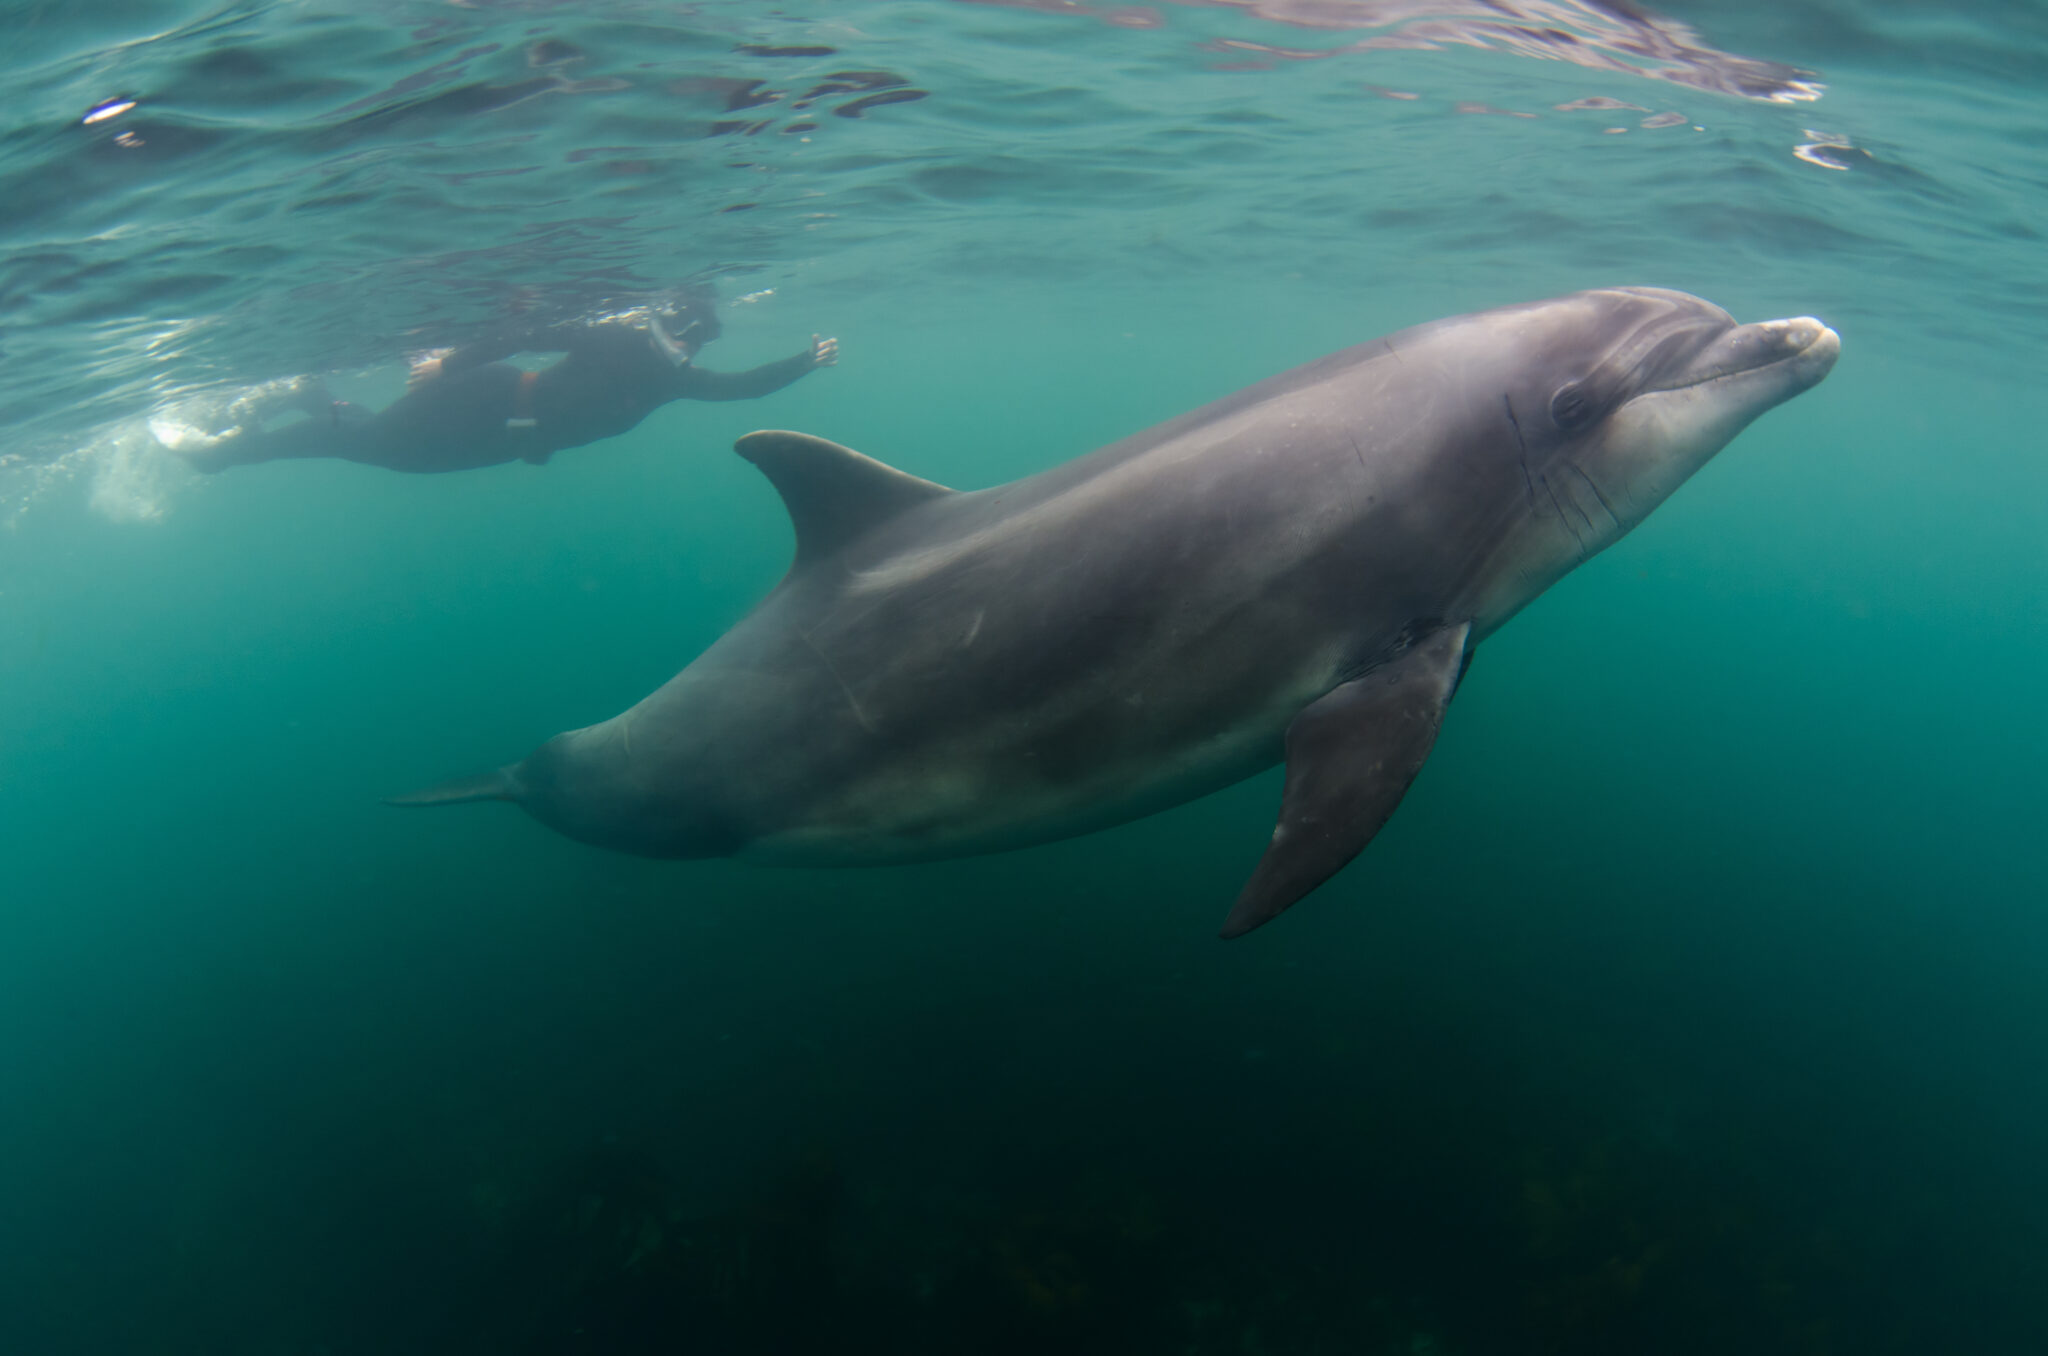 Fanore is one of the luckiest dive sites in Ireland to see dolphins while snorkeling or scuba diving.